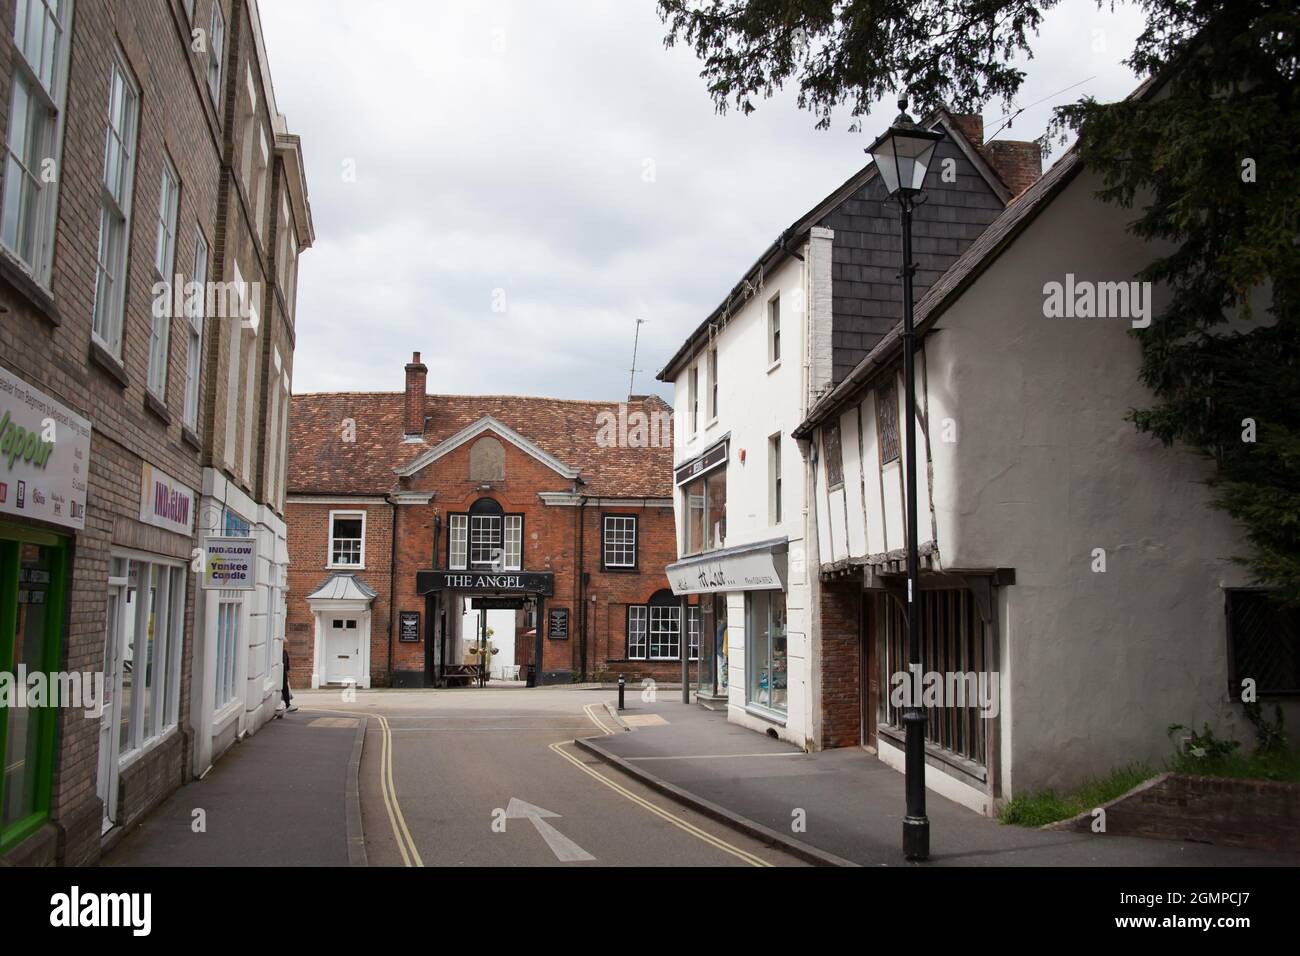 Views of the town centre in Andover, Hampshire in the UK Stock Photo